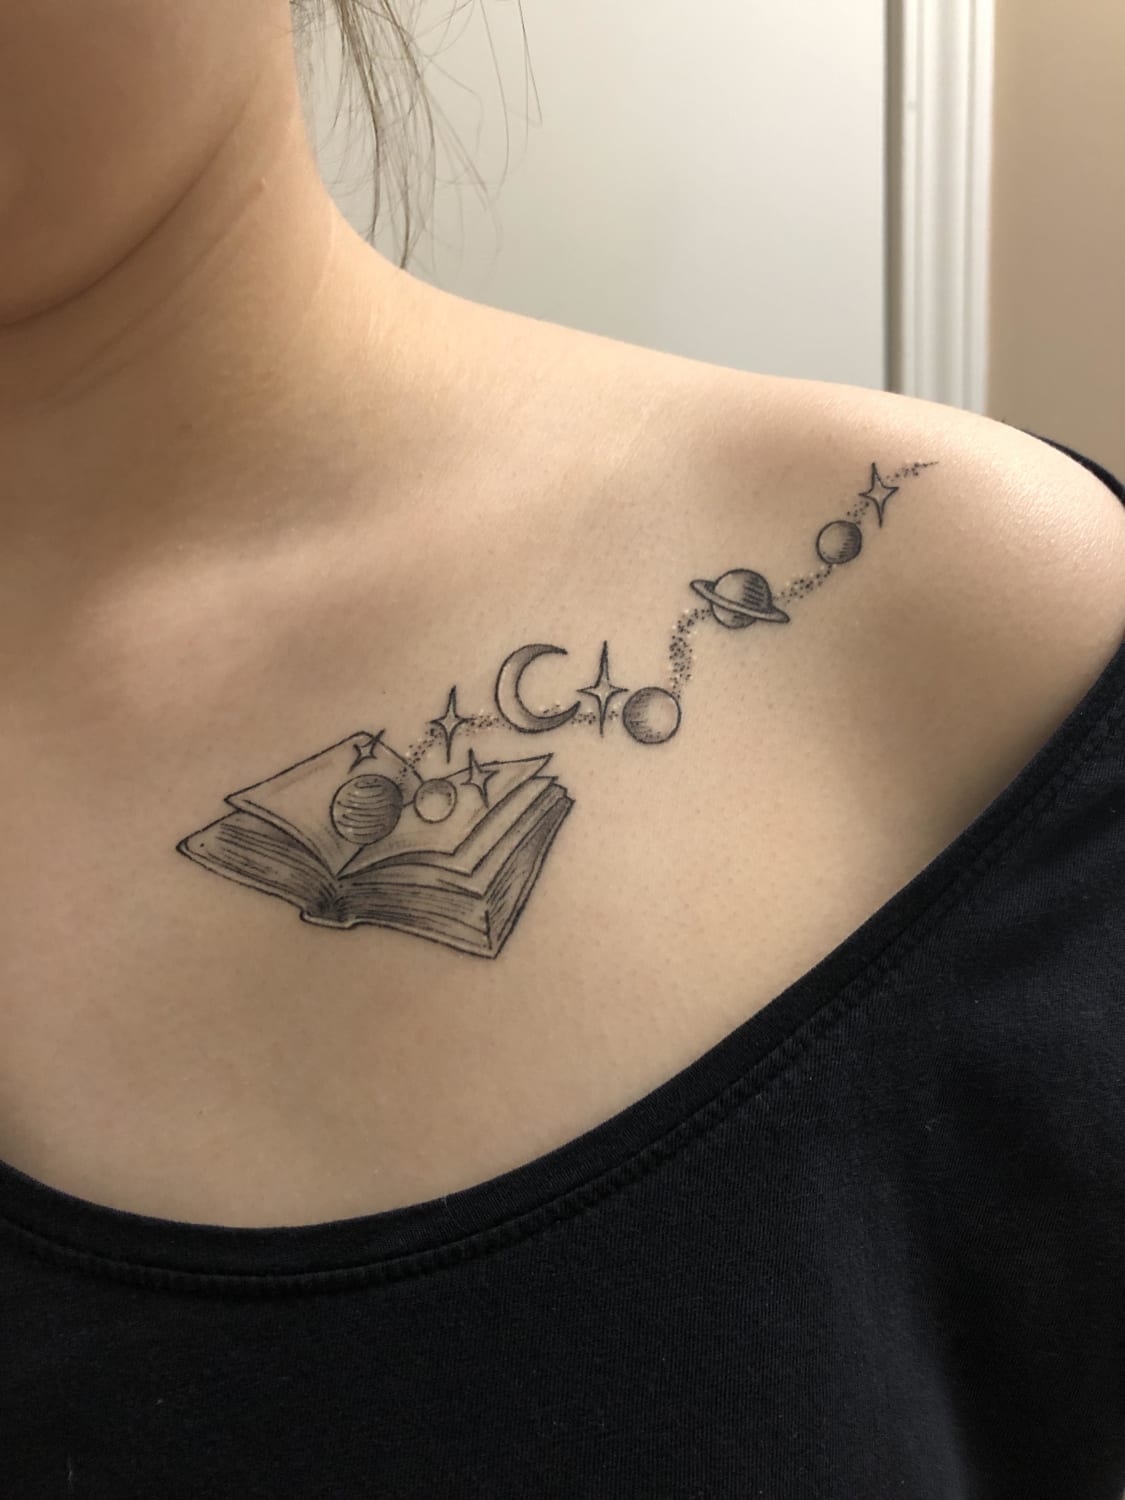 Book with space done by Aubry Claire at Empryrean Tattoo in Marietta GA. Done in January, healed pic from February